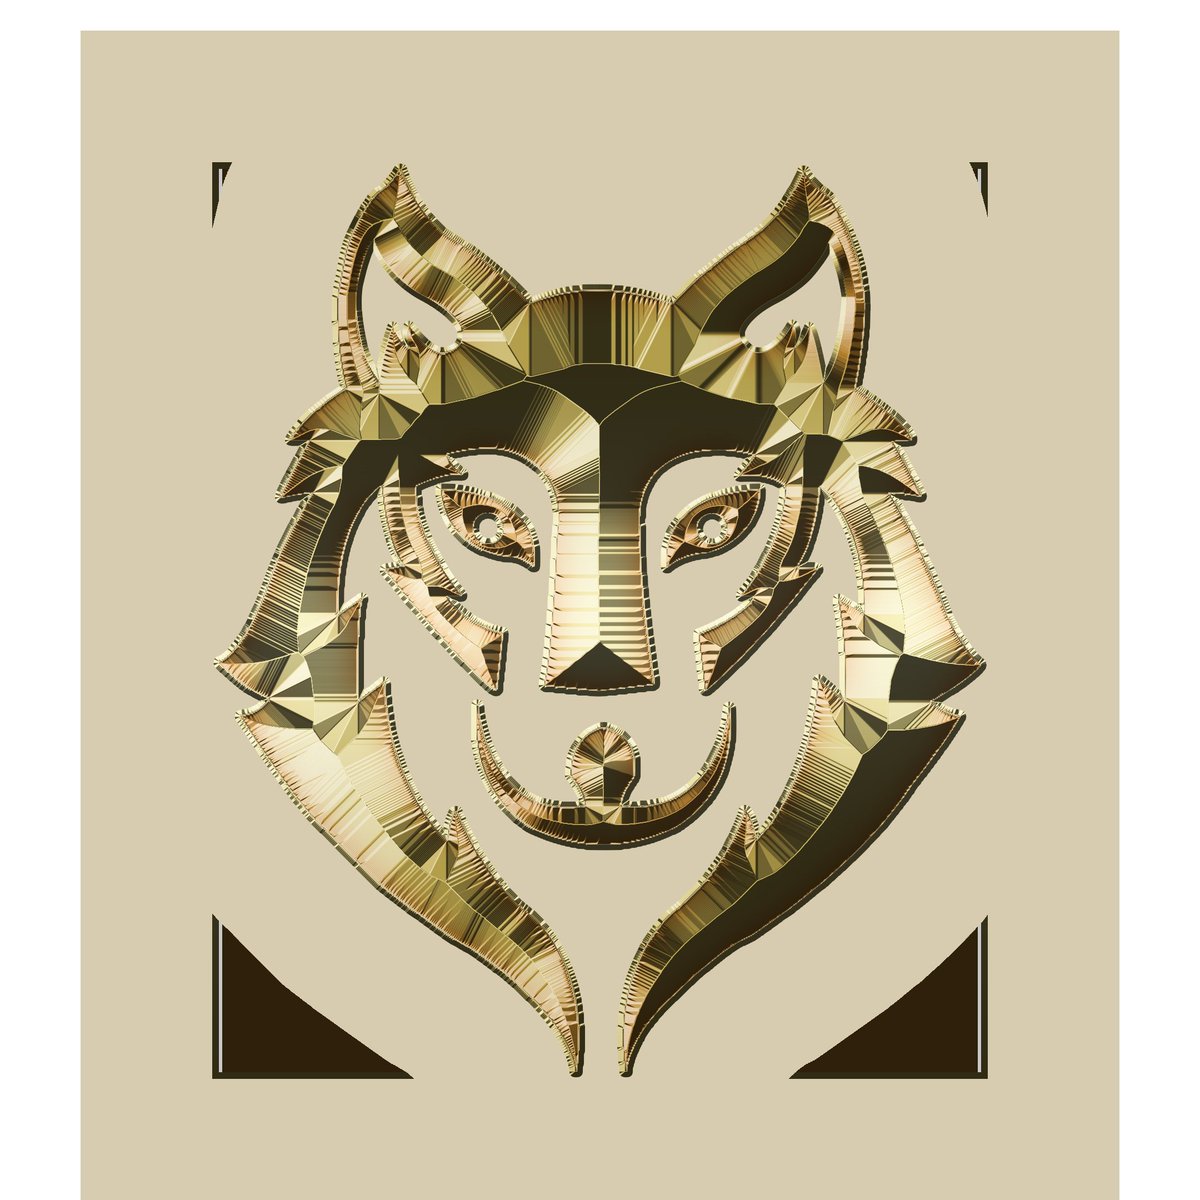 Golden Wolf
.
digital artwork of gold bars resembling the shape of a wolf. Made using Adobe Photoshop
#NFTCommunity #artwork #Goldenglobes2023 #opensea #NFTs #NFTCollection #art